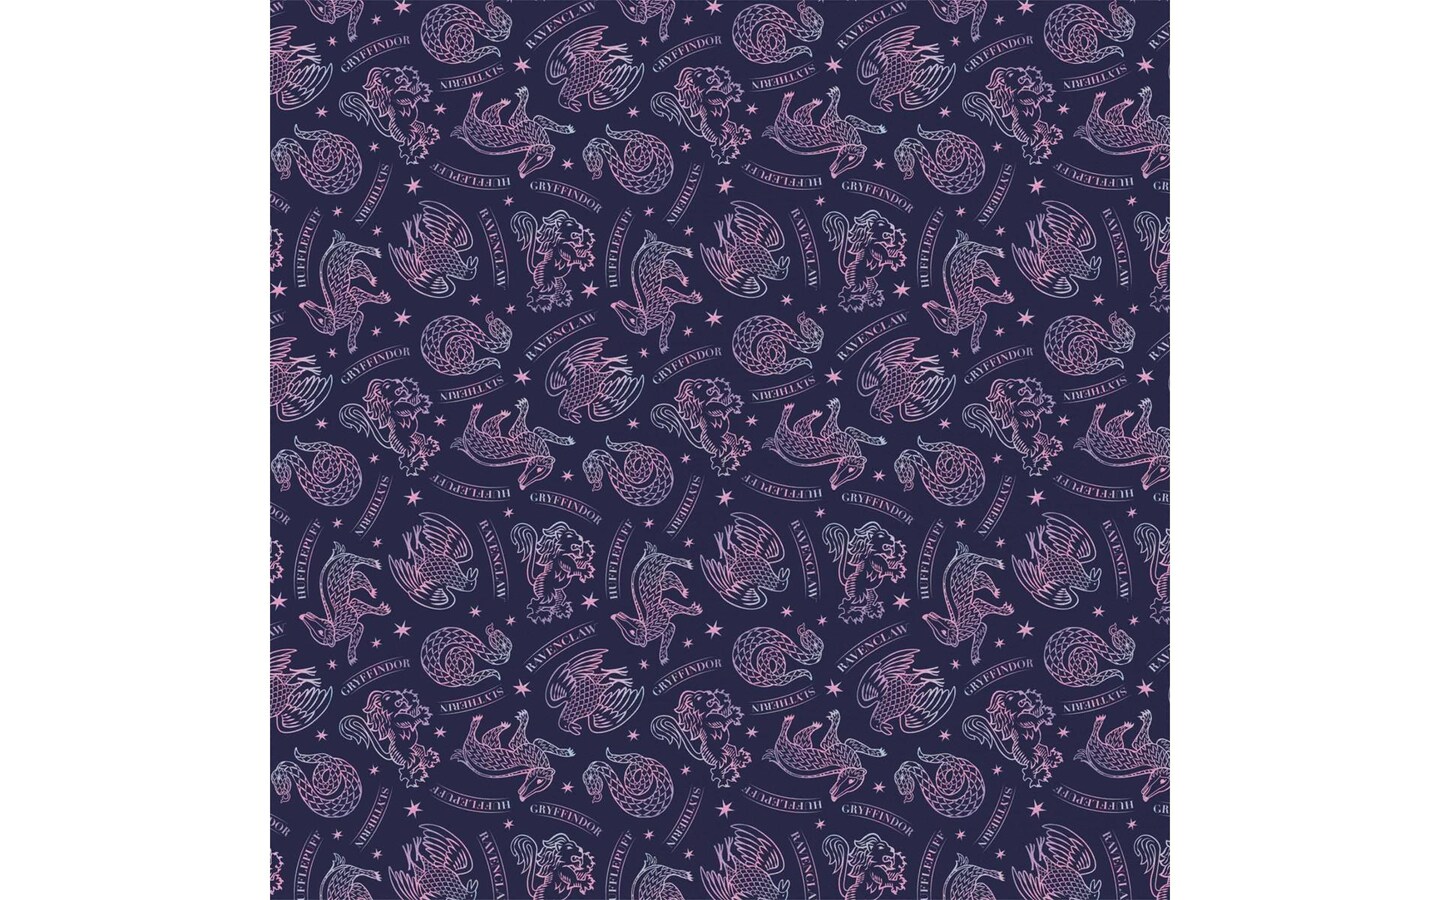 Camelot Harry Potter Raven claw House 100% Cotton Print Fabric